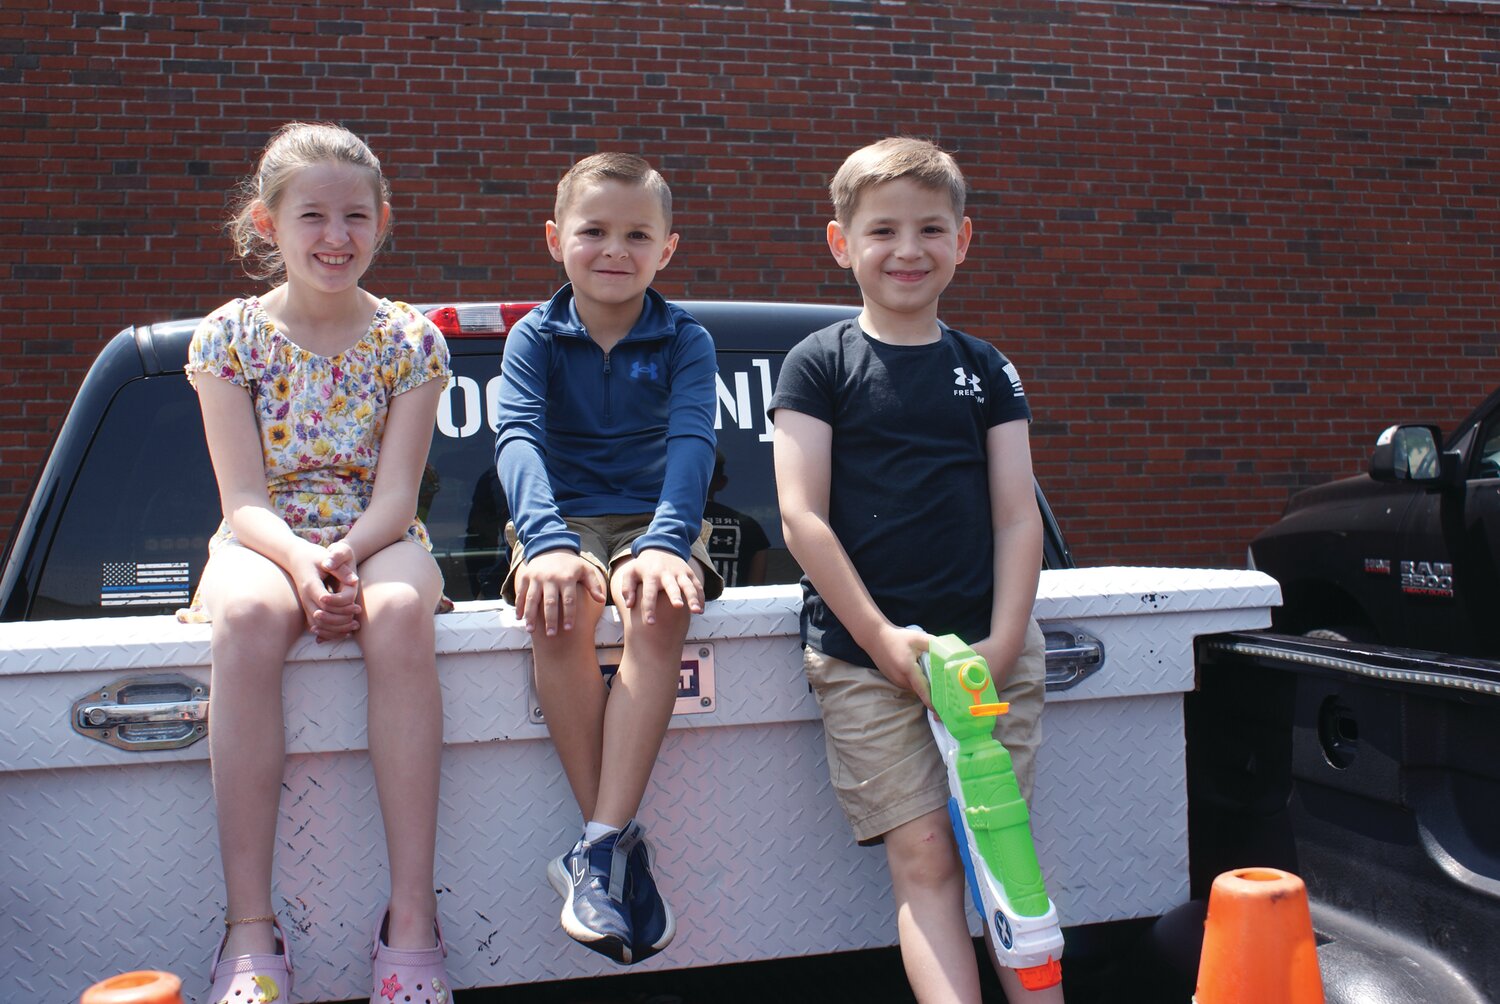 SONY DSCENJOYING THE SHOW: (Left to Right) Mackenzie Iacone(9), Philip DiSano (6) and Jonathan Iacone (6) happily watch as Zuess grabs on to Officer O’Donnell and won’t let go until the command is given as they sit in the back of the Iacone family pickup truck with the perfect view just off of Rolfe Square.  (Photos by Steve Popiel)